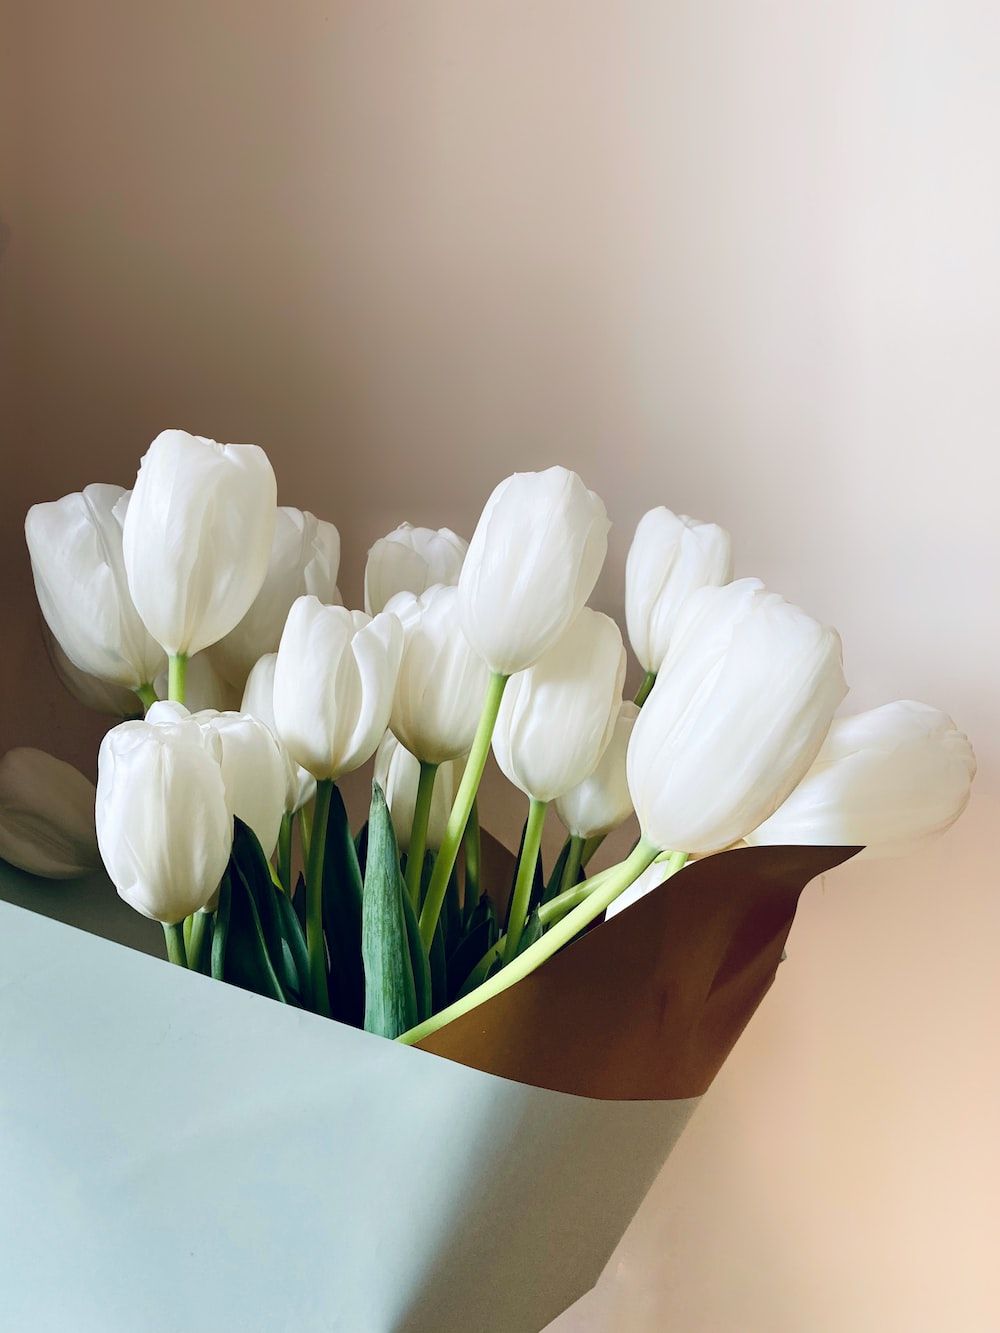 Tulips Bouquet Picture. Download Free Image